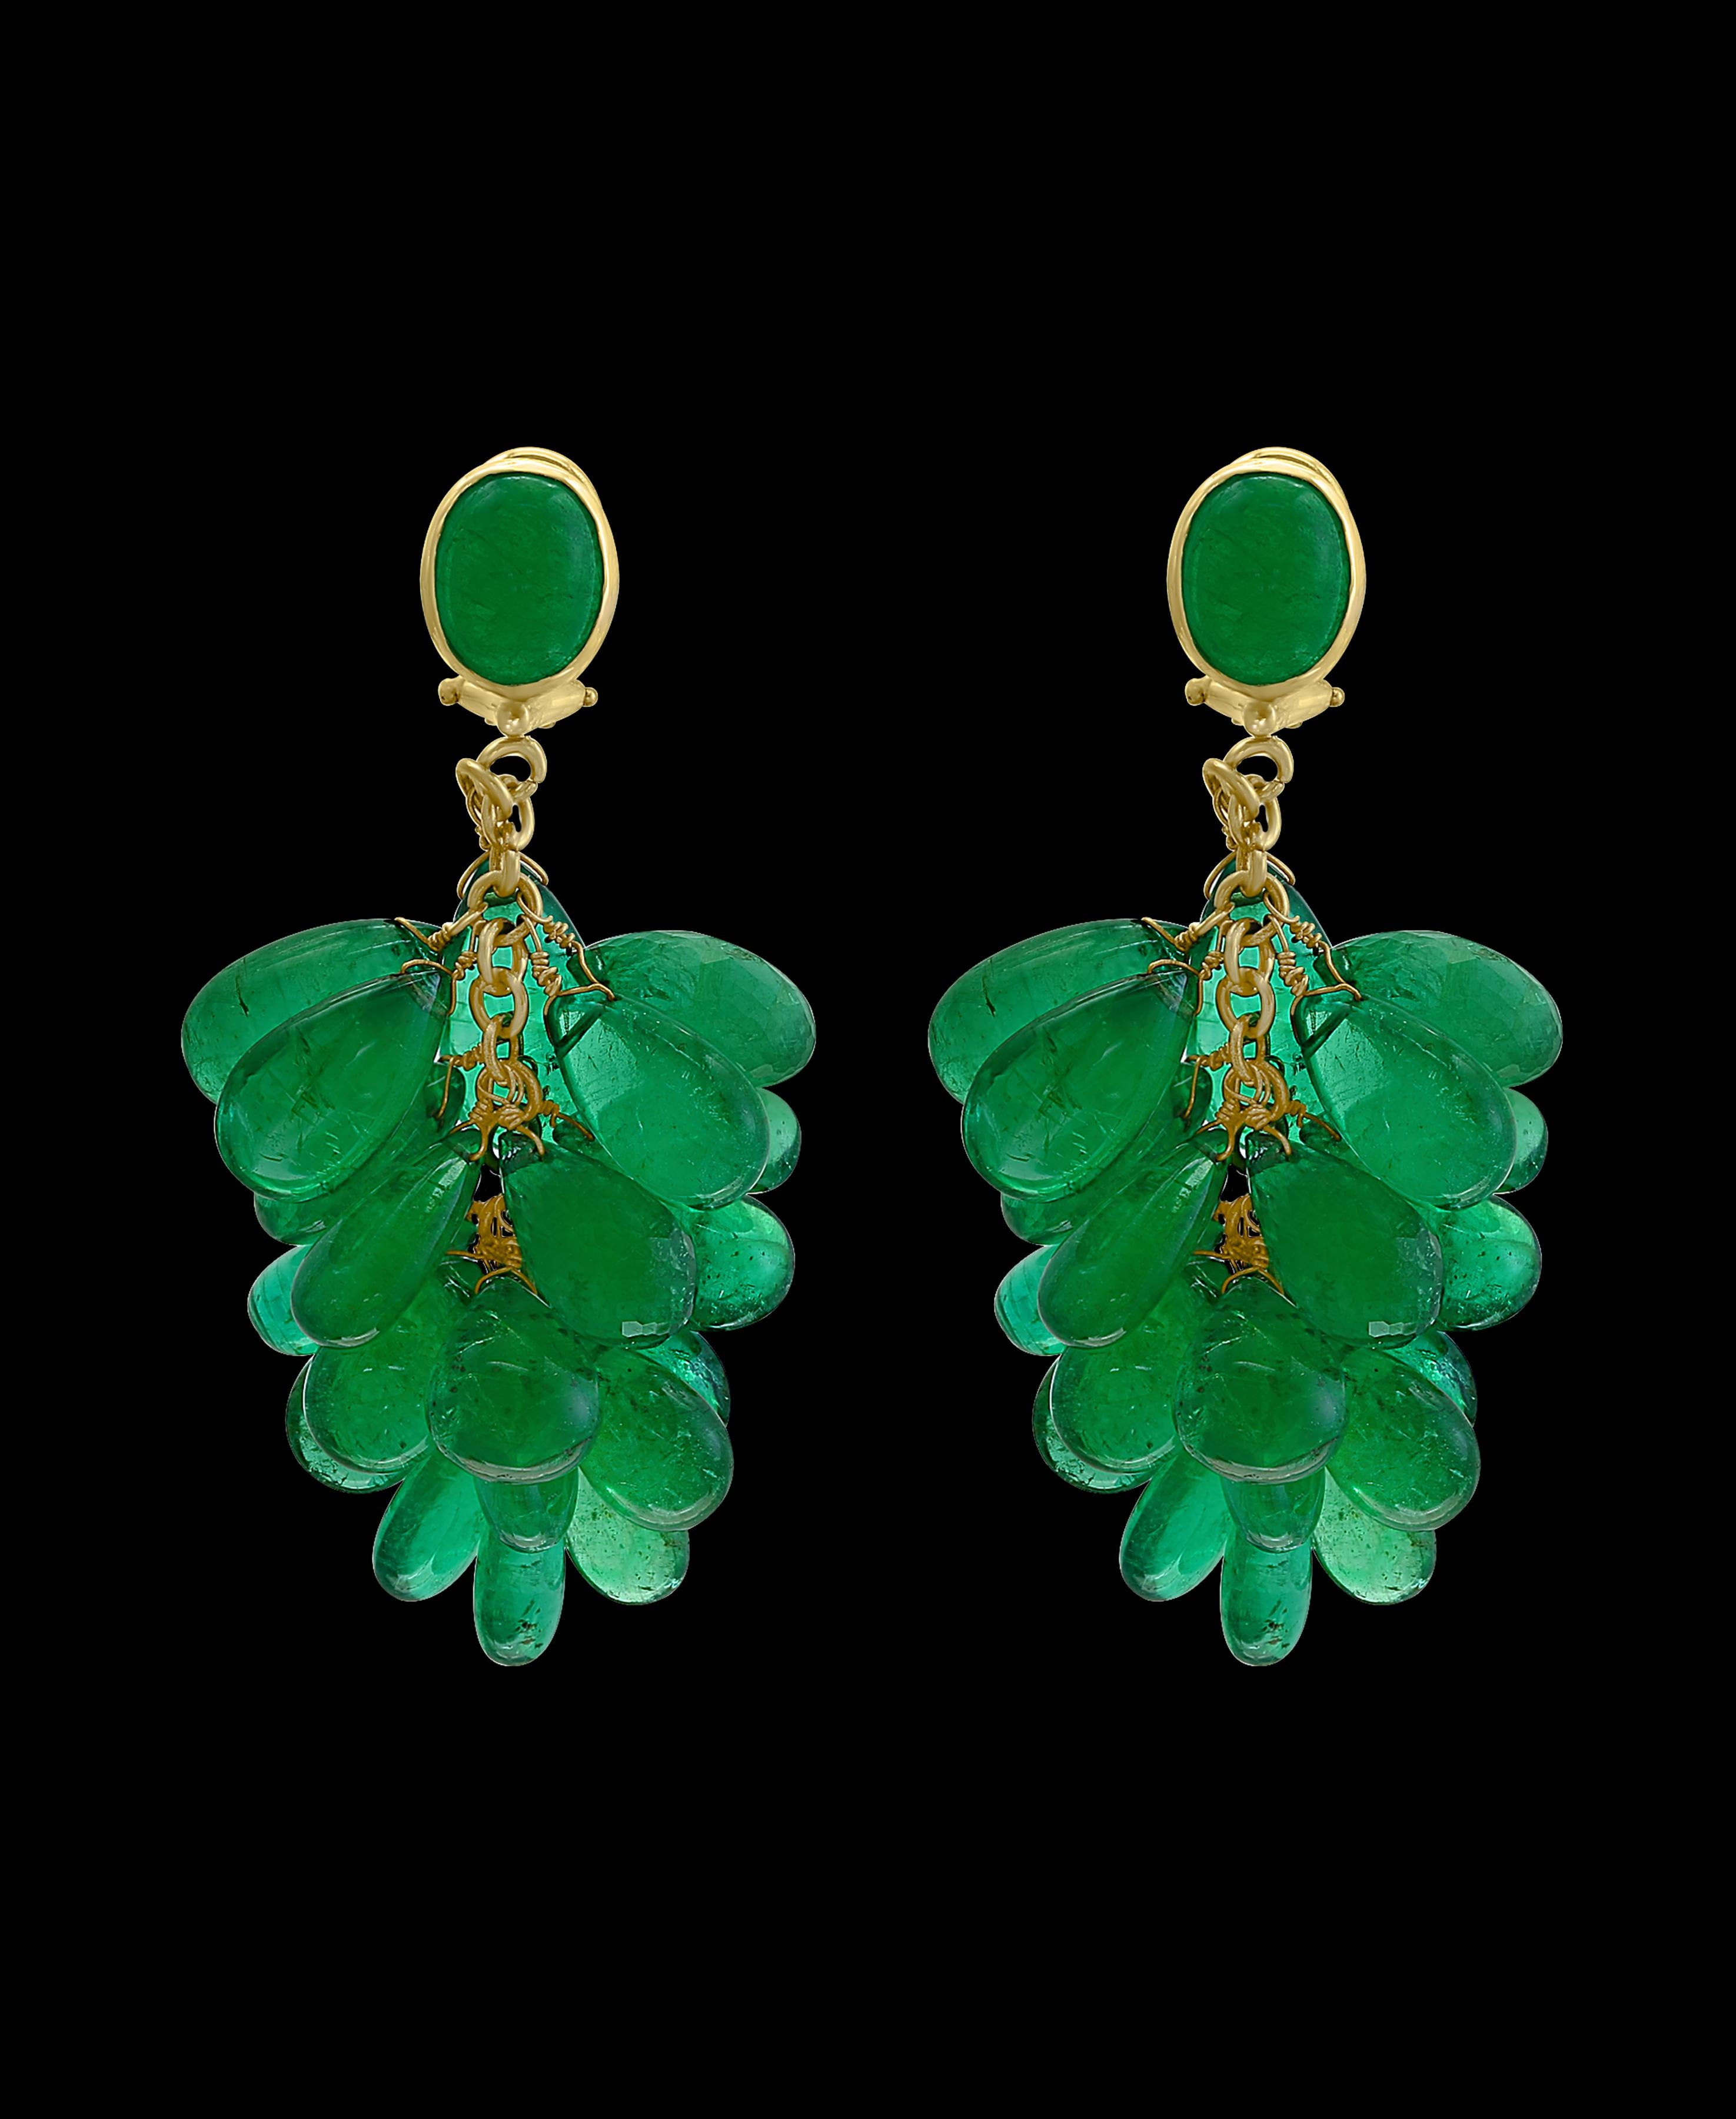 140 Carat Colombian Emerald Briolettes Hanging Drop Earrings 18 Karat Gold In Excellent Condition For Sale In New York, NY